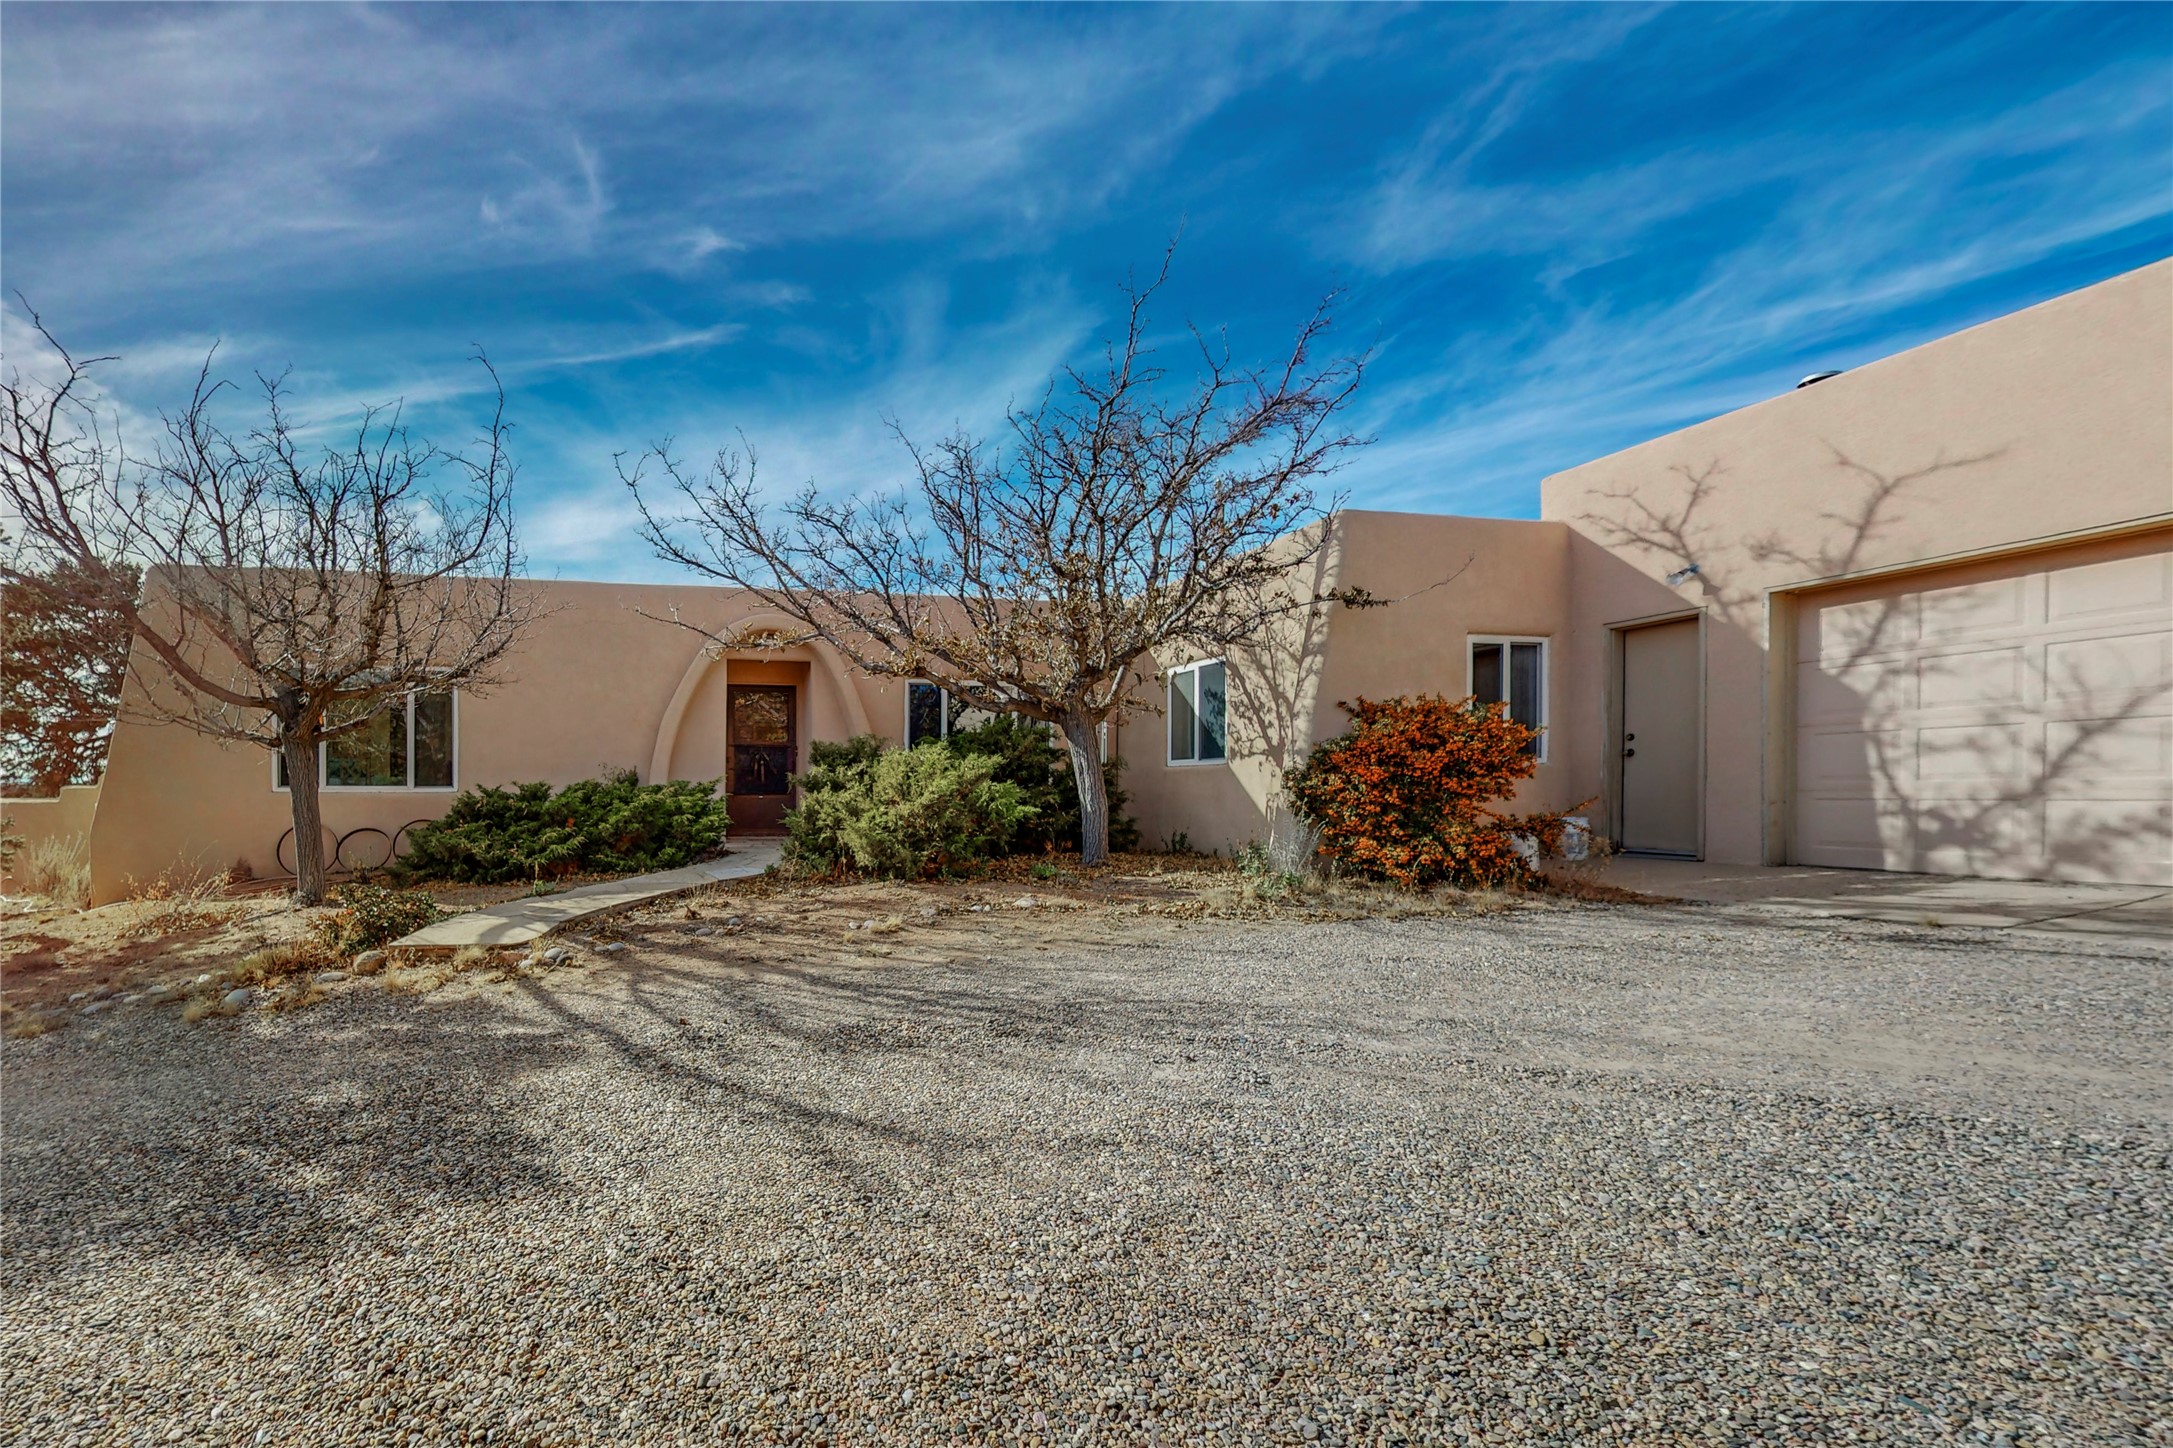 34 Ute Circle, Santa Fe, New Mexico 87505, 2 Bedrooms Bedrooms, ,2 BathroomsBathrooms,Residential,For Sale,34 Ute Circle,202341832